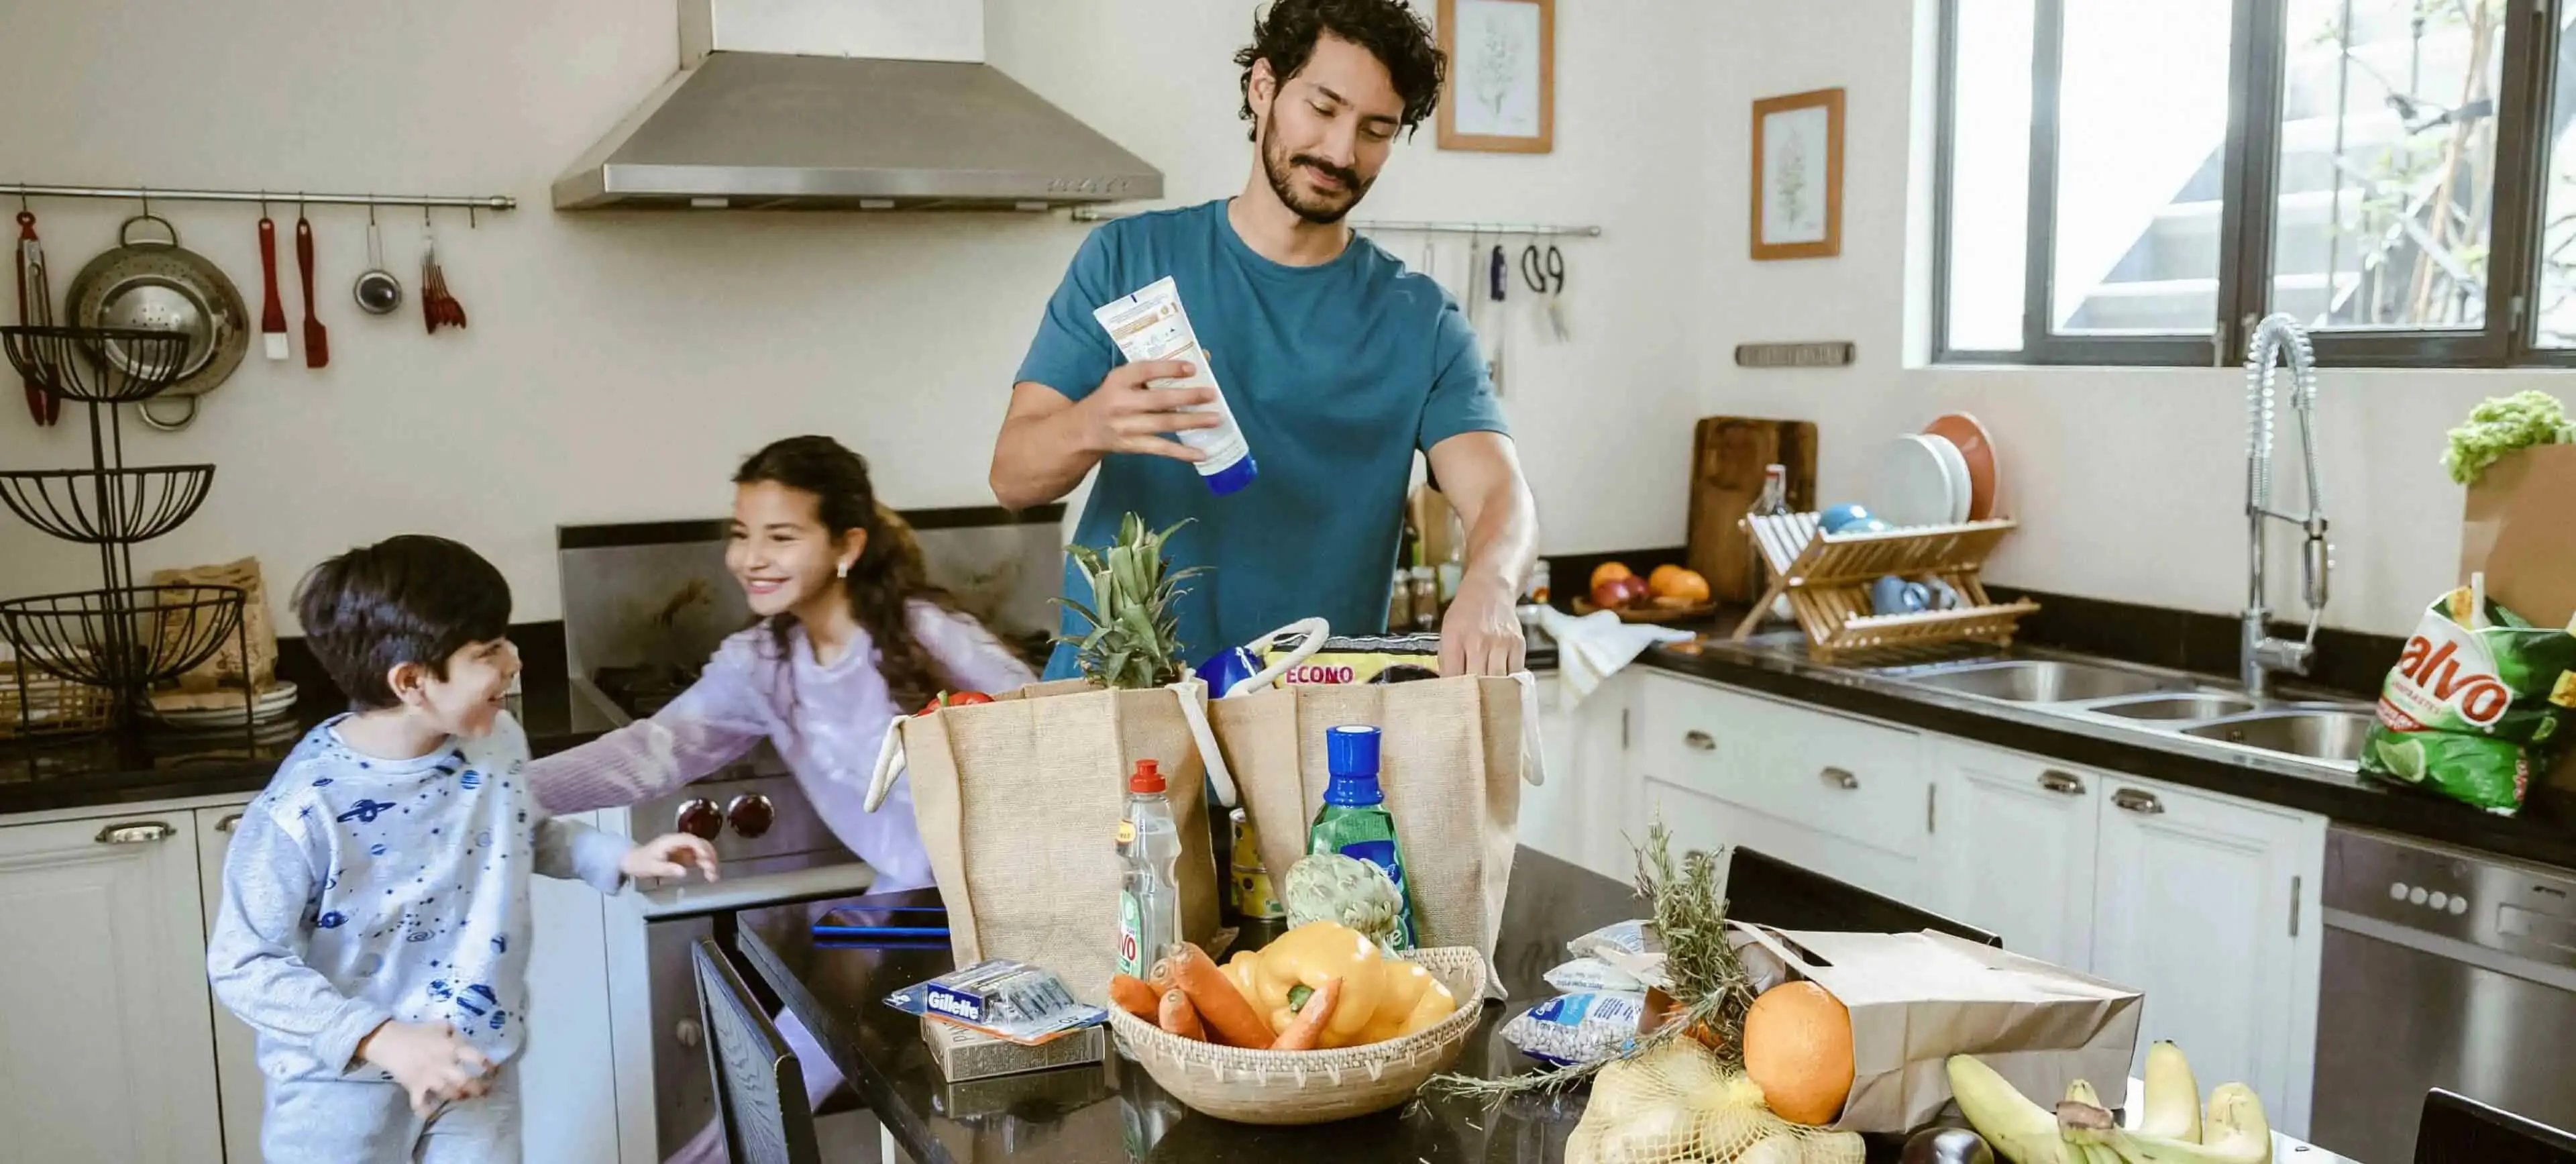 Man is unpacking groceries in kitchen while two children play in the background